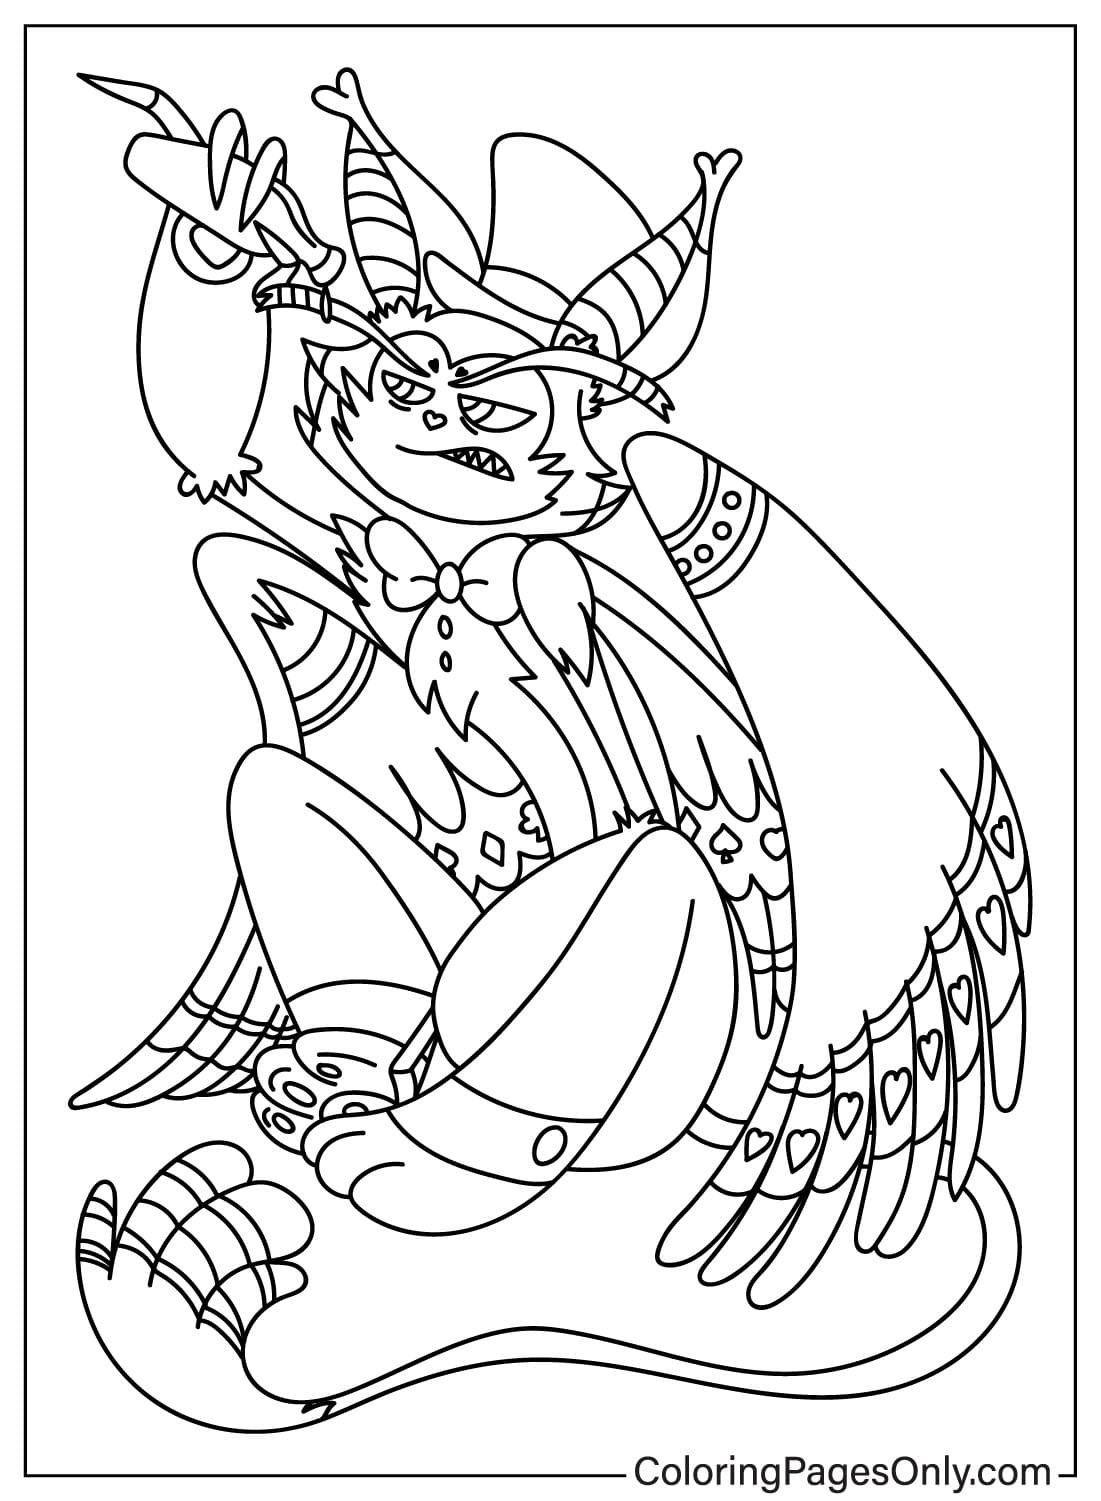 Husk Drink Alcohol Coloring Page from Husk